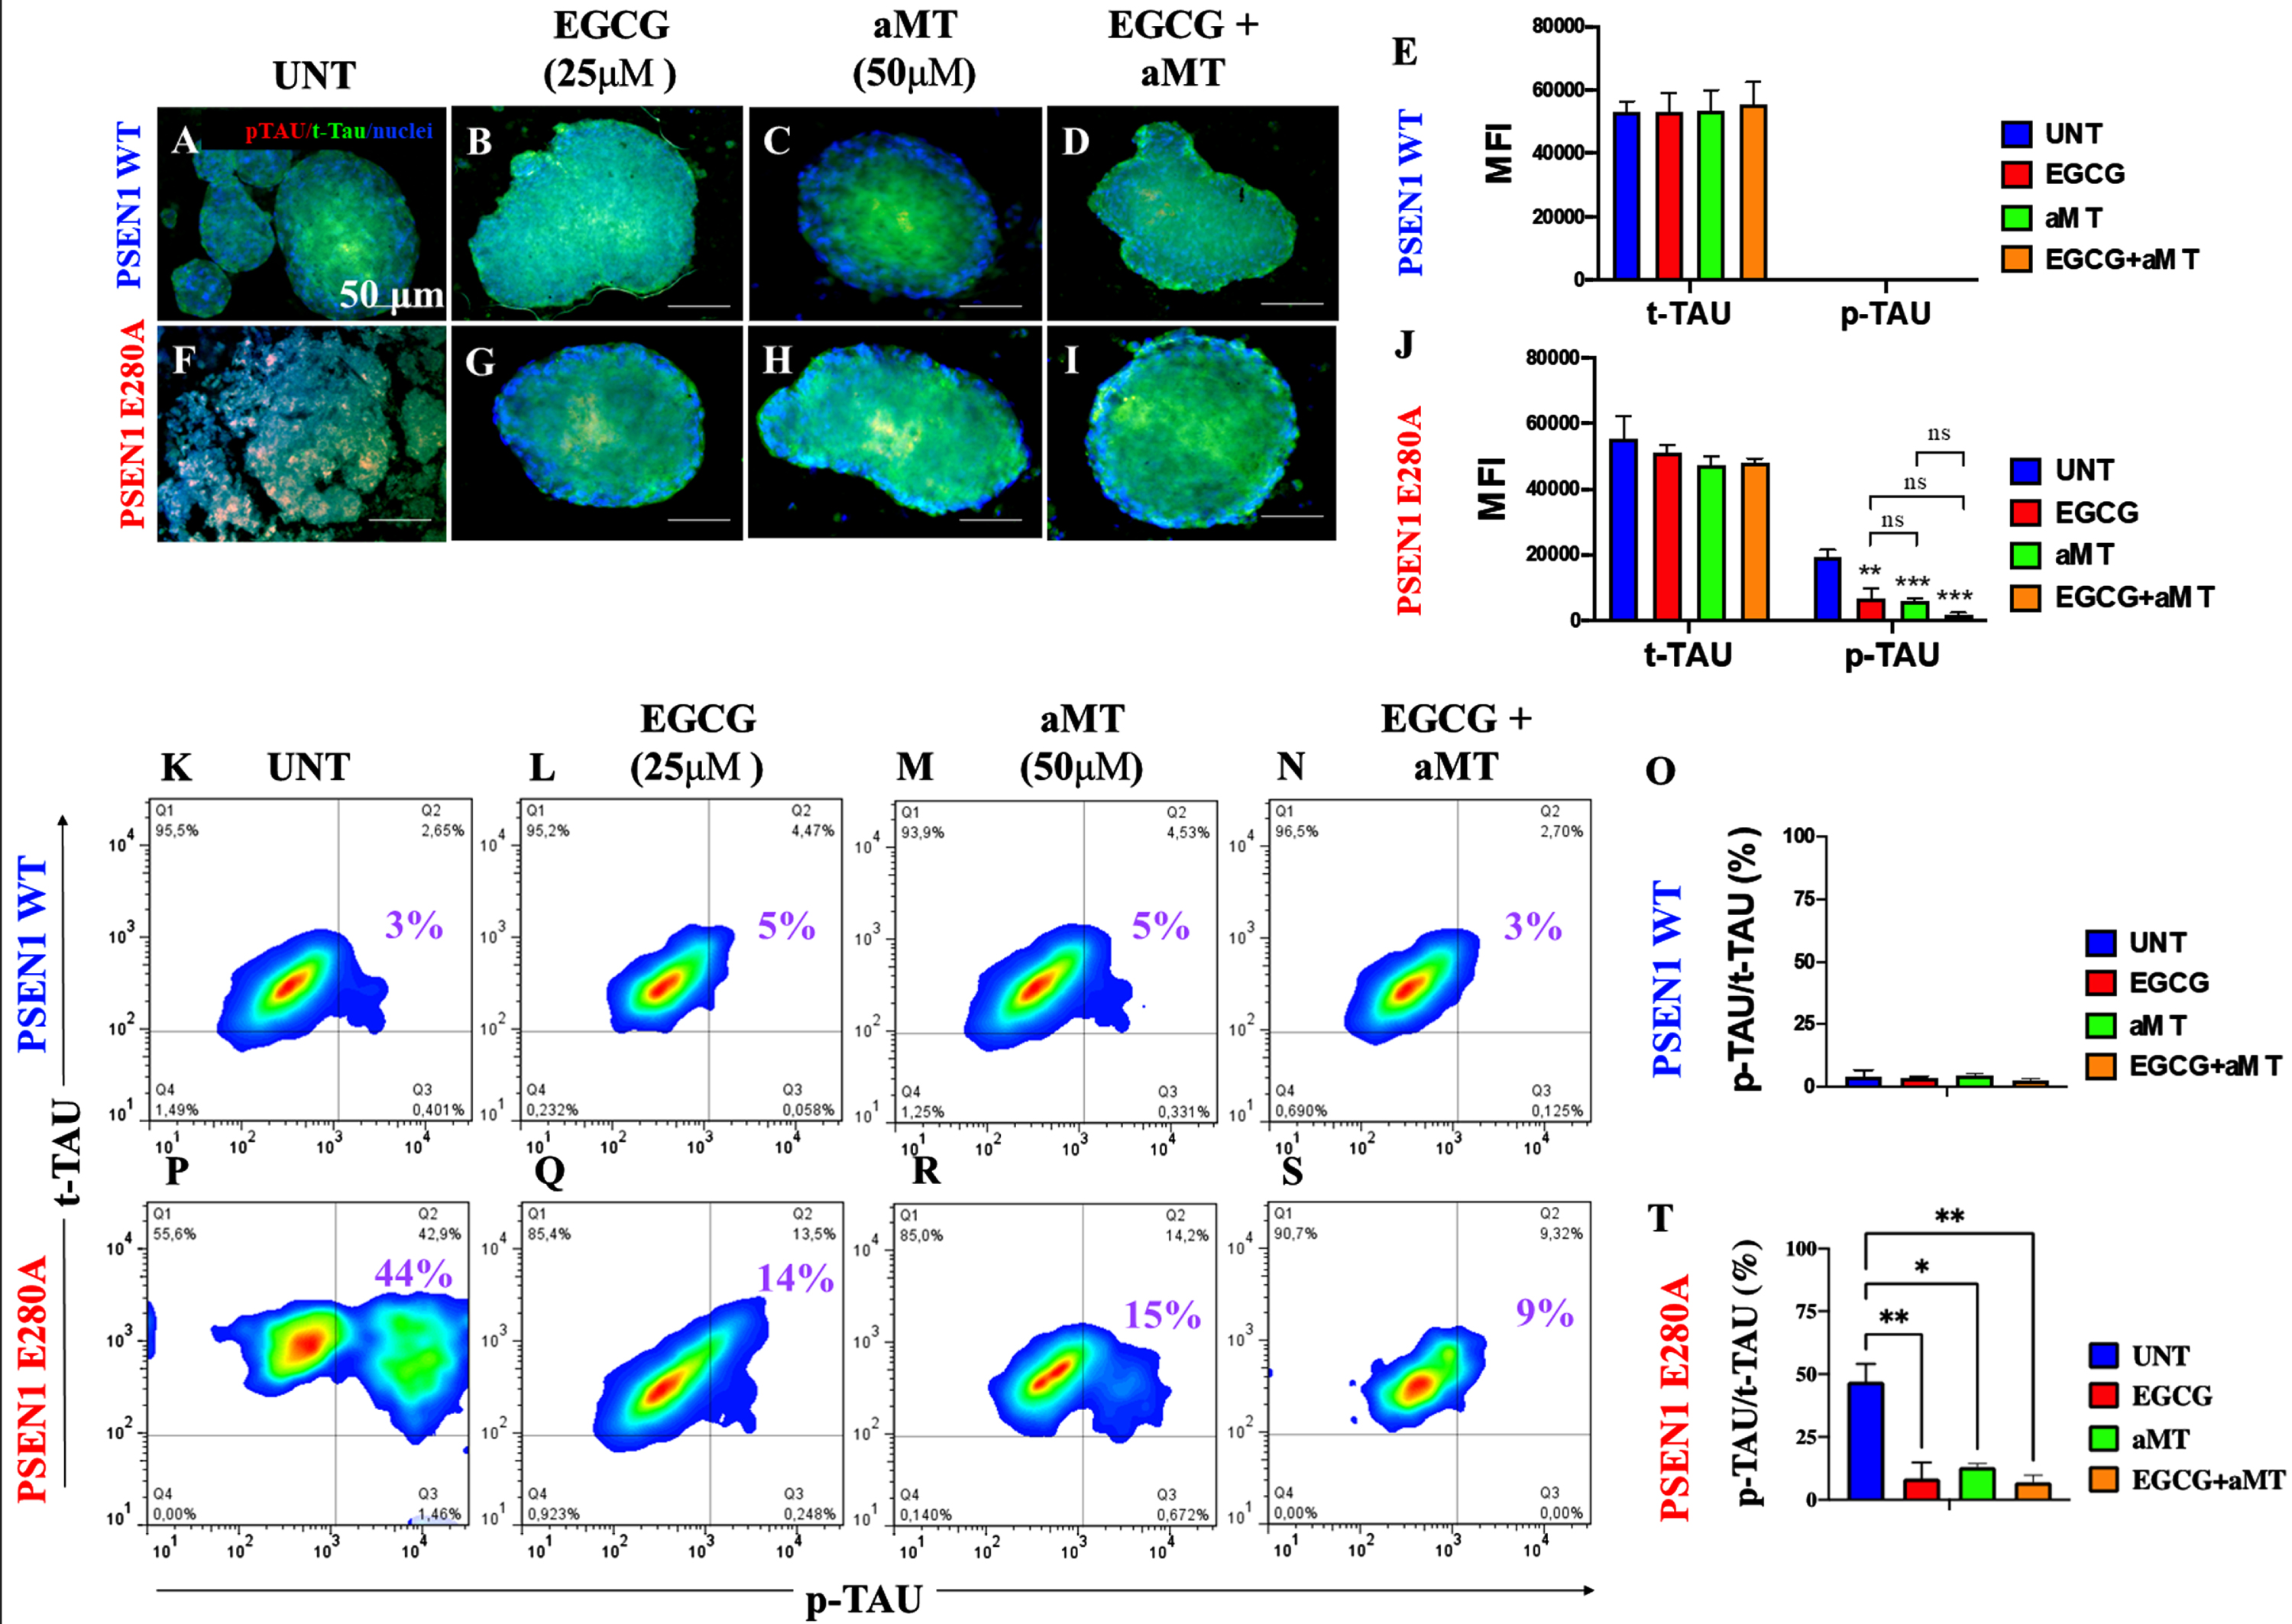 Combined treatment with EGCG and aMT completely blocked the phosphorylation of protein tau. WT PSEN1 and PSEN1 E280A CSs were left without (UNT; A, B) or treated with 25μM EGCG (C, D) and 50μM aMT (E, F) alone or in combination (G, H) for 11 days. CSs were double-stained as indicated in the figure with antibodies against phosphorylated (Ser202/Thr205) Tau (p-Tau; red), total Tau (t-Tau; green), and nuclei were stained with Hoechst (blue). I) Mean fluorescence intensity (MFI) quantification of images obtained by immunofluorescence analysis of PSEN1 WT CSs. J) MFI quantification of images obtained by immunofluorescence analysis of PSEN1 E280A CSs. K-N, P-S) Representative 2D density plot showing t-tau (y-axis) and p-tau (x-axis) flow cytometry double analysis performed on untreated WT (K) and mutant CSs (P), or treated with EGCG only (L, Q), aMT only (M, R), or EGCG/ aMT (N, S). O, T) represent the quantitative analysis of the data from quadrant Q2. The 2D histograms and images represent one out of three independent experiments. Statistical significance was determined by one-way ANOVA with a Tukey post hoc test; **p < 0.01; ***p < 0.001. Image magnification 10x.